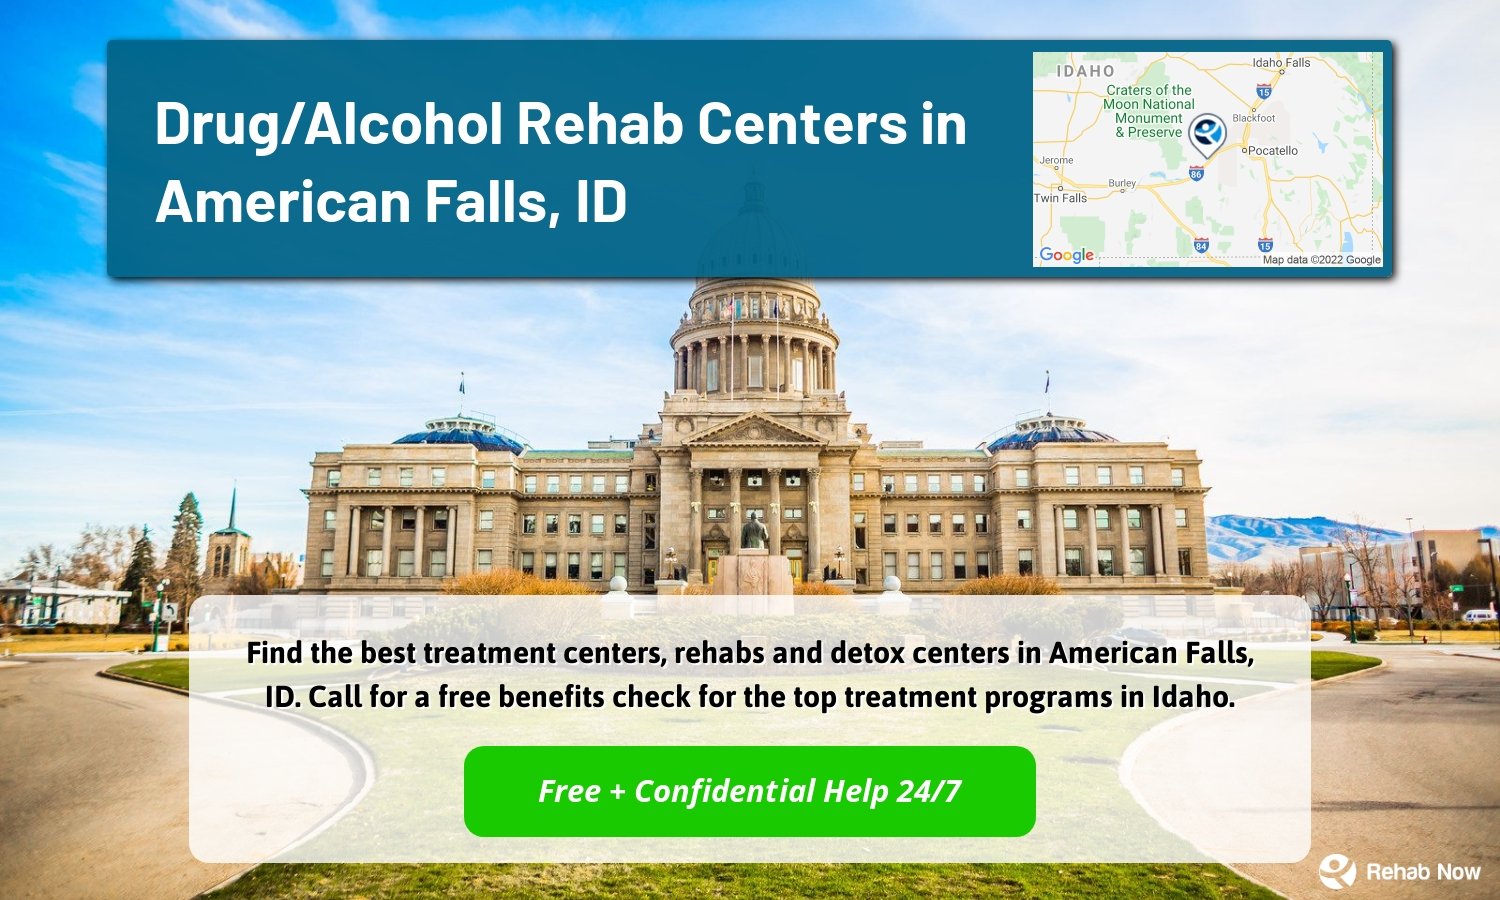 Find the best treatment centers, rehabs and detox centers in American Falls, ID. Call for a free benefits check for the top treatment programs in Idaho.